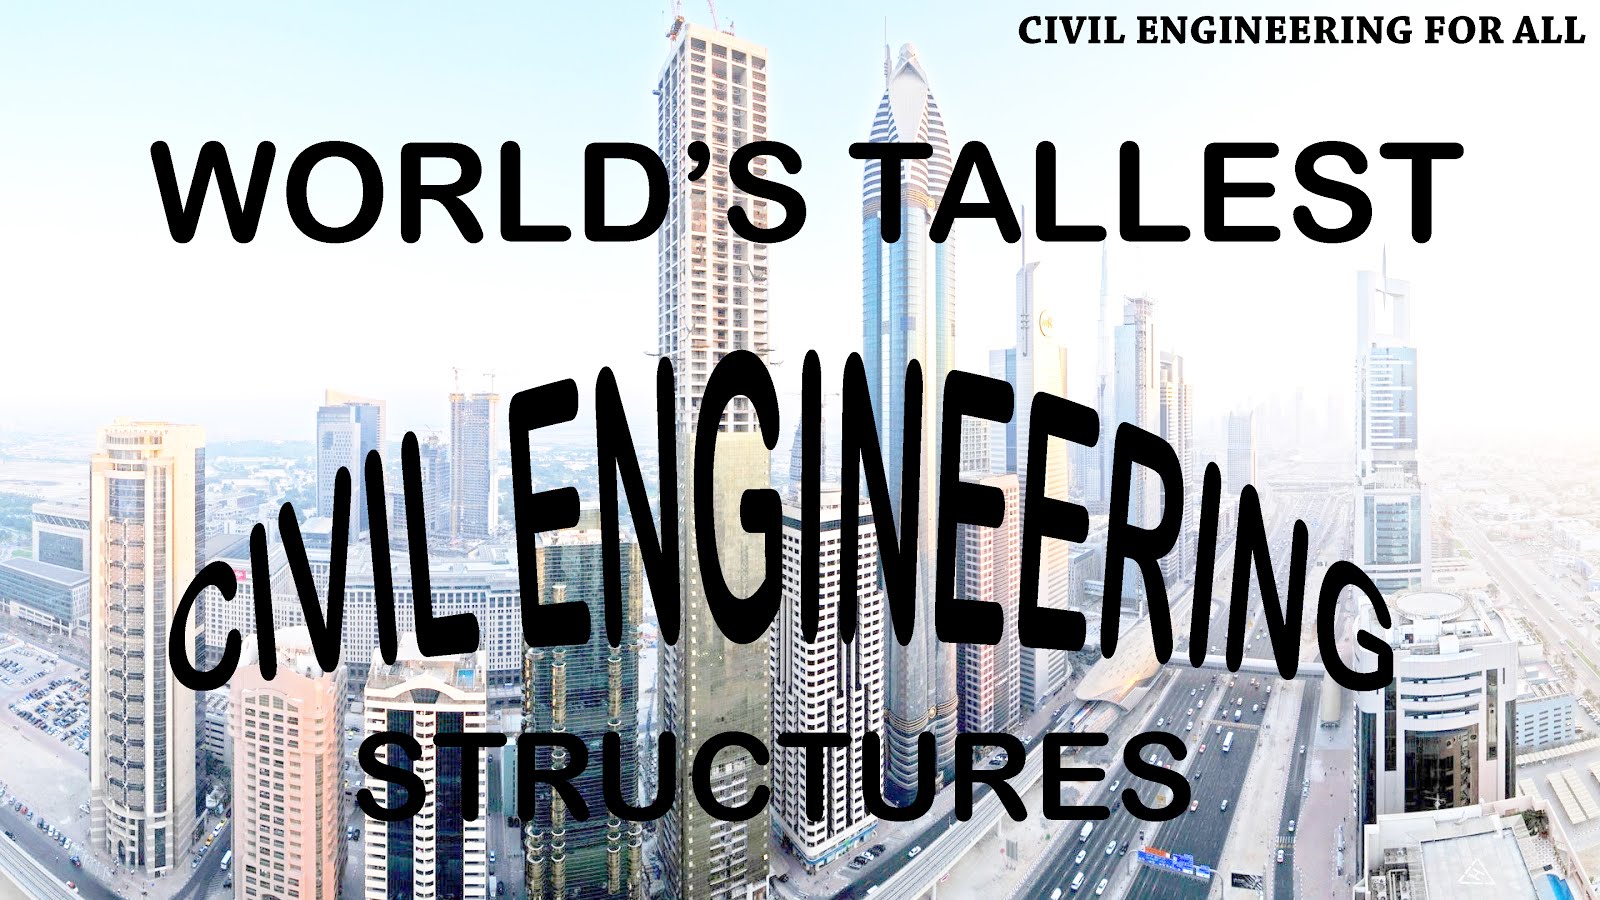 WORLD'S TALLEST STRUCTURES